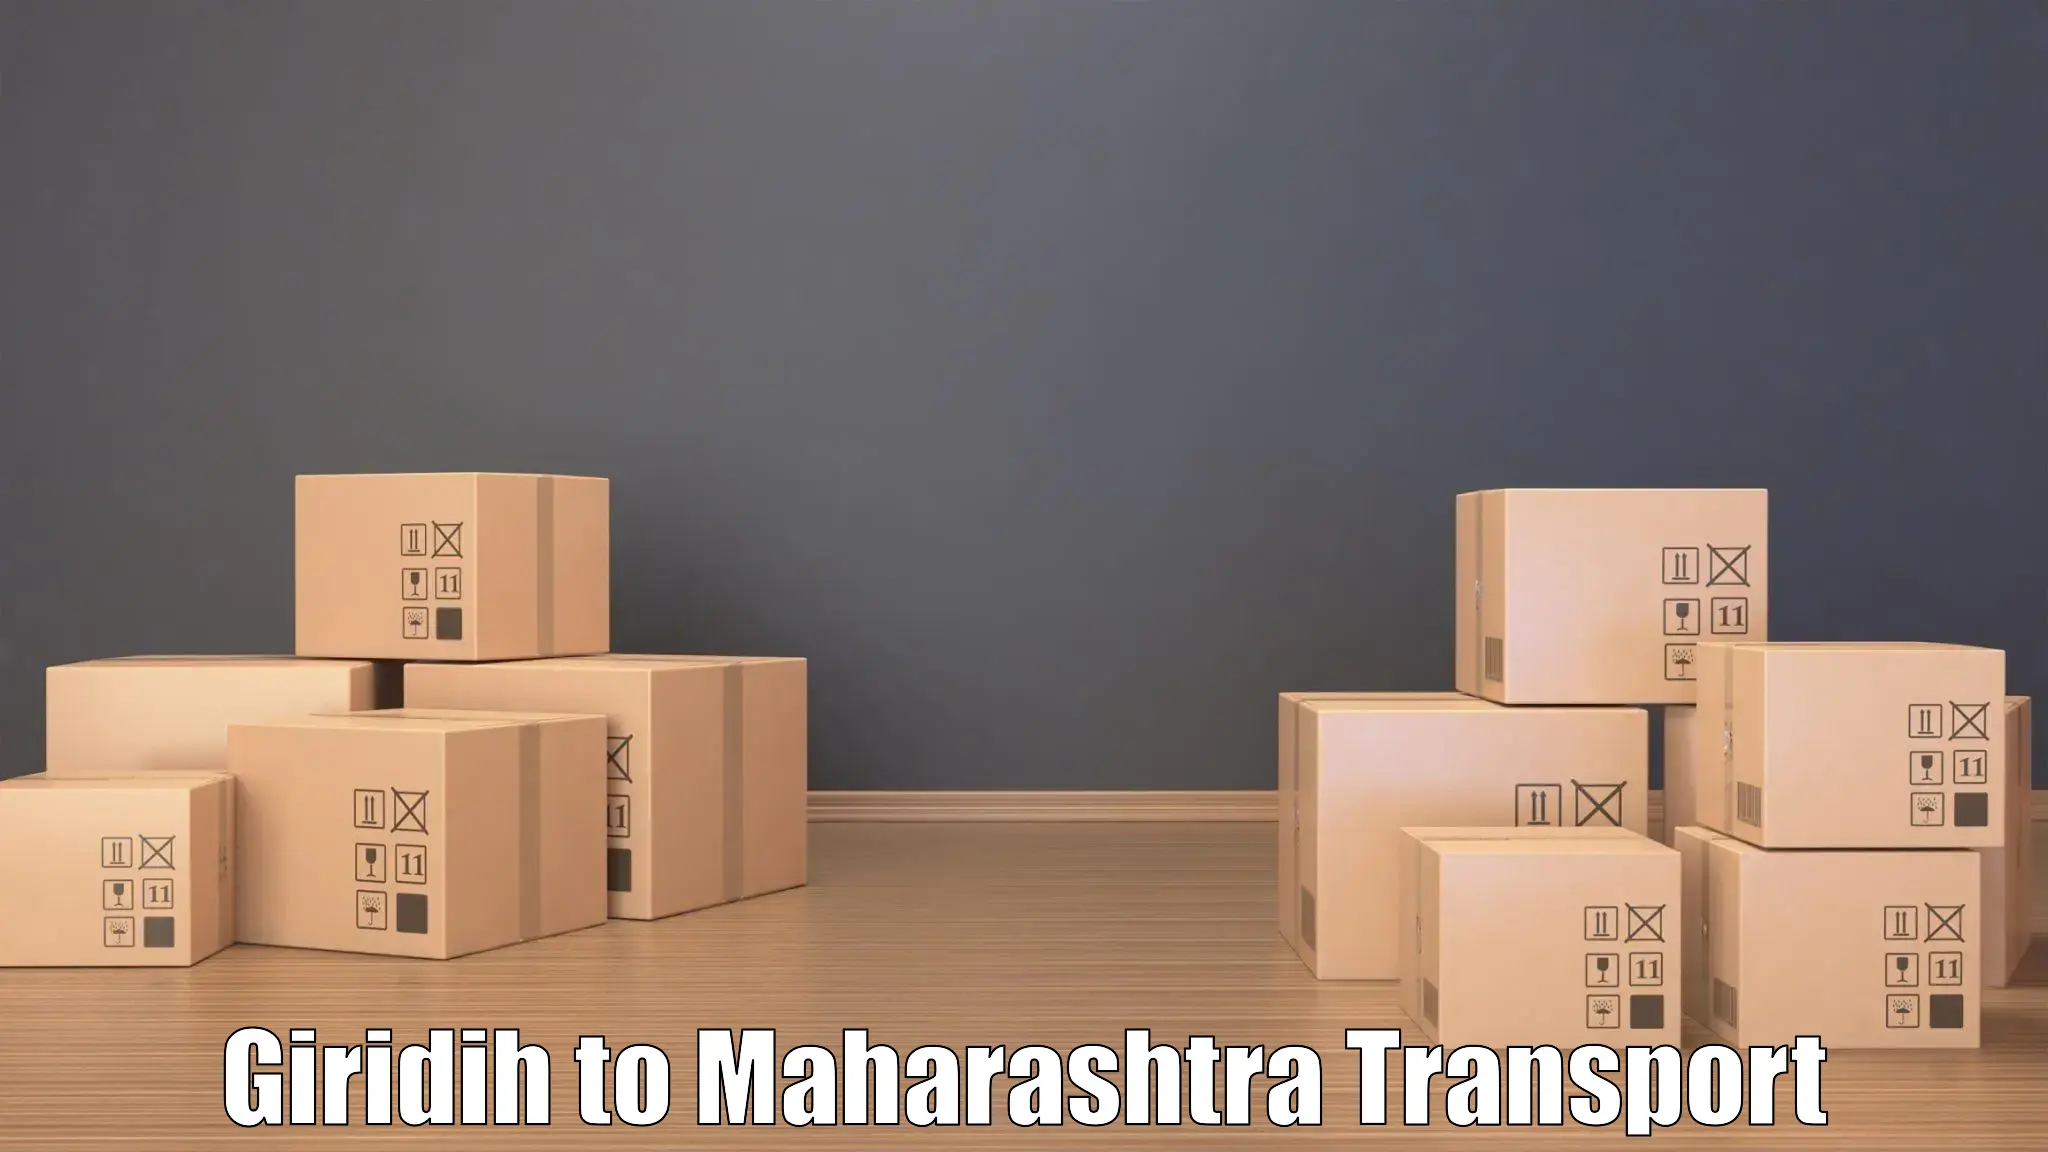 Package delivery services Giridih to Raigarh Maharashtra